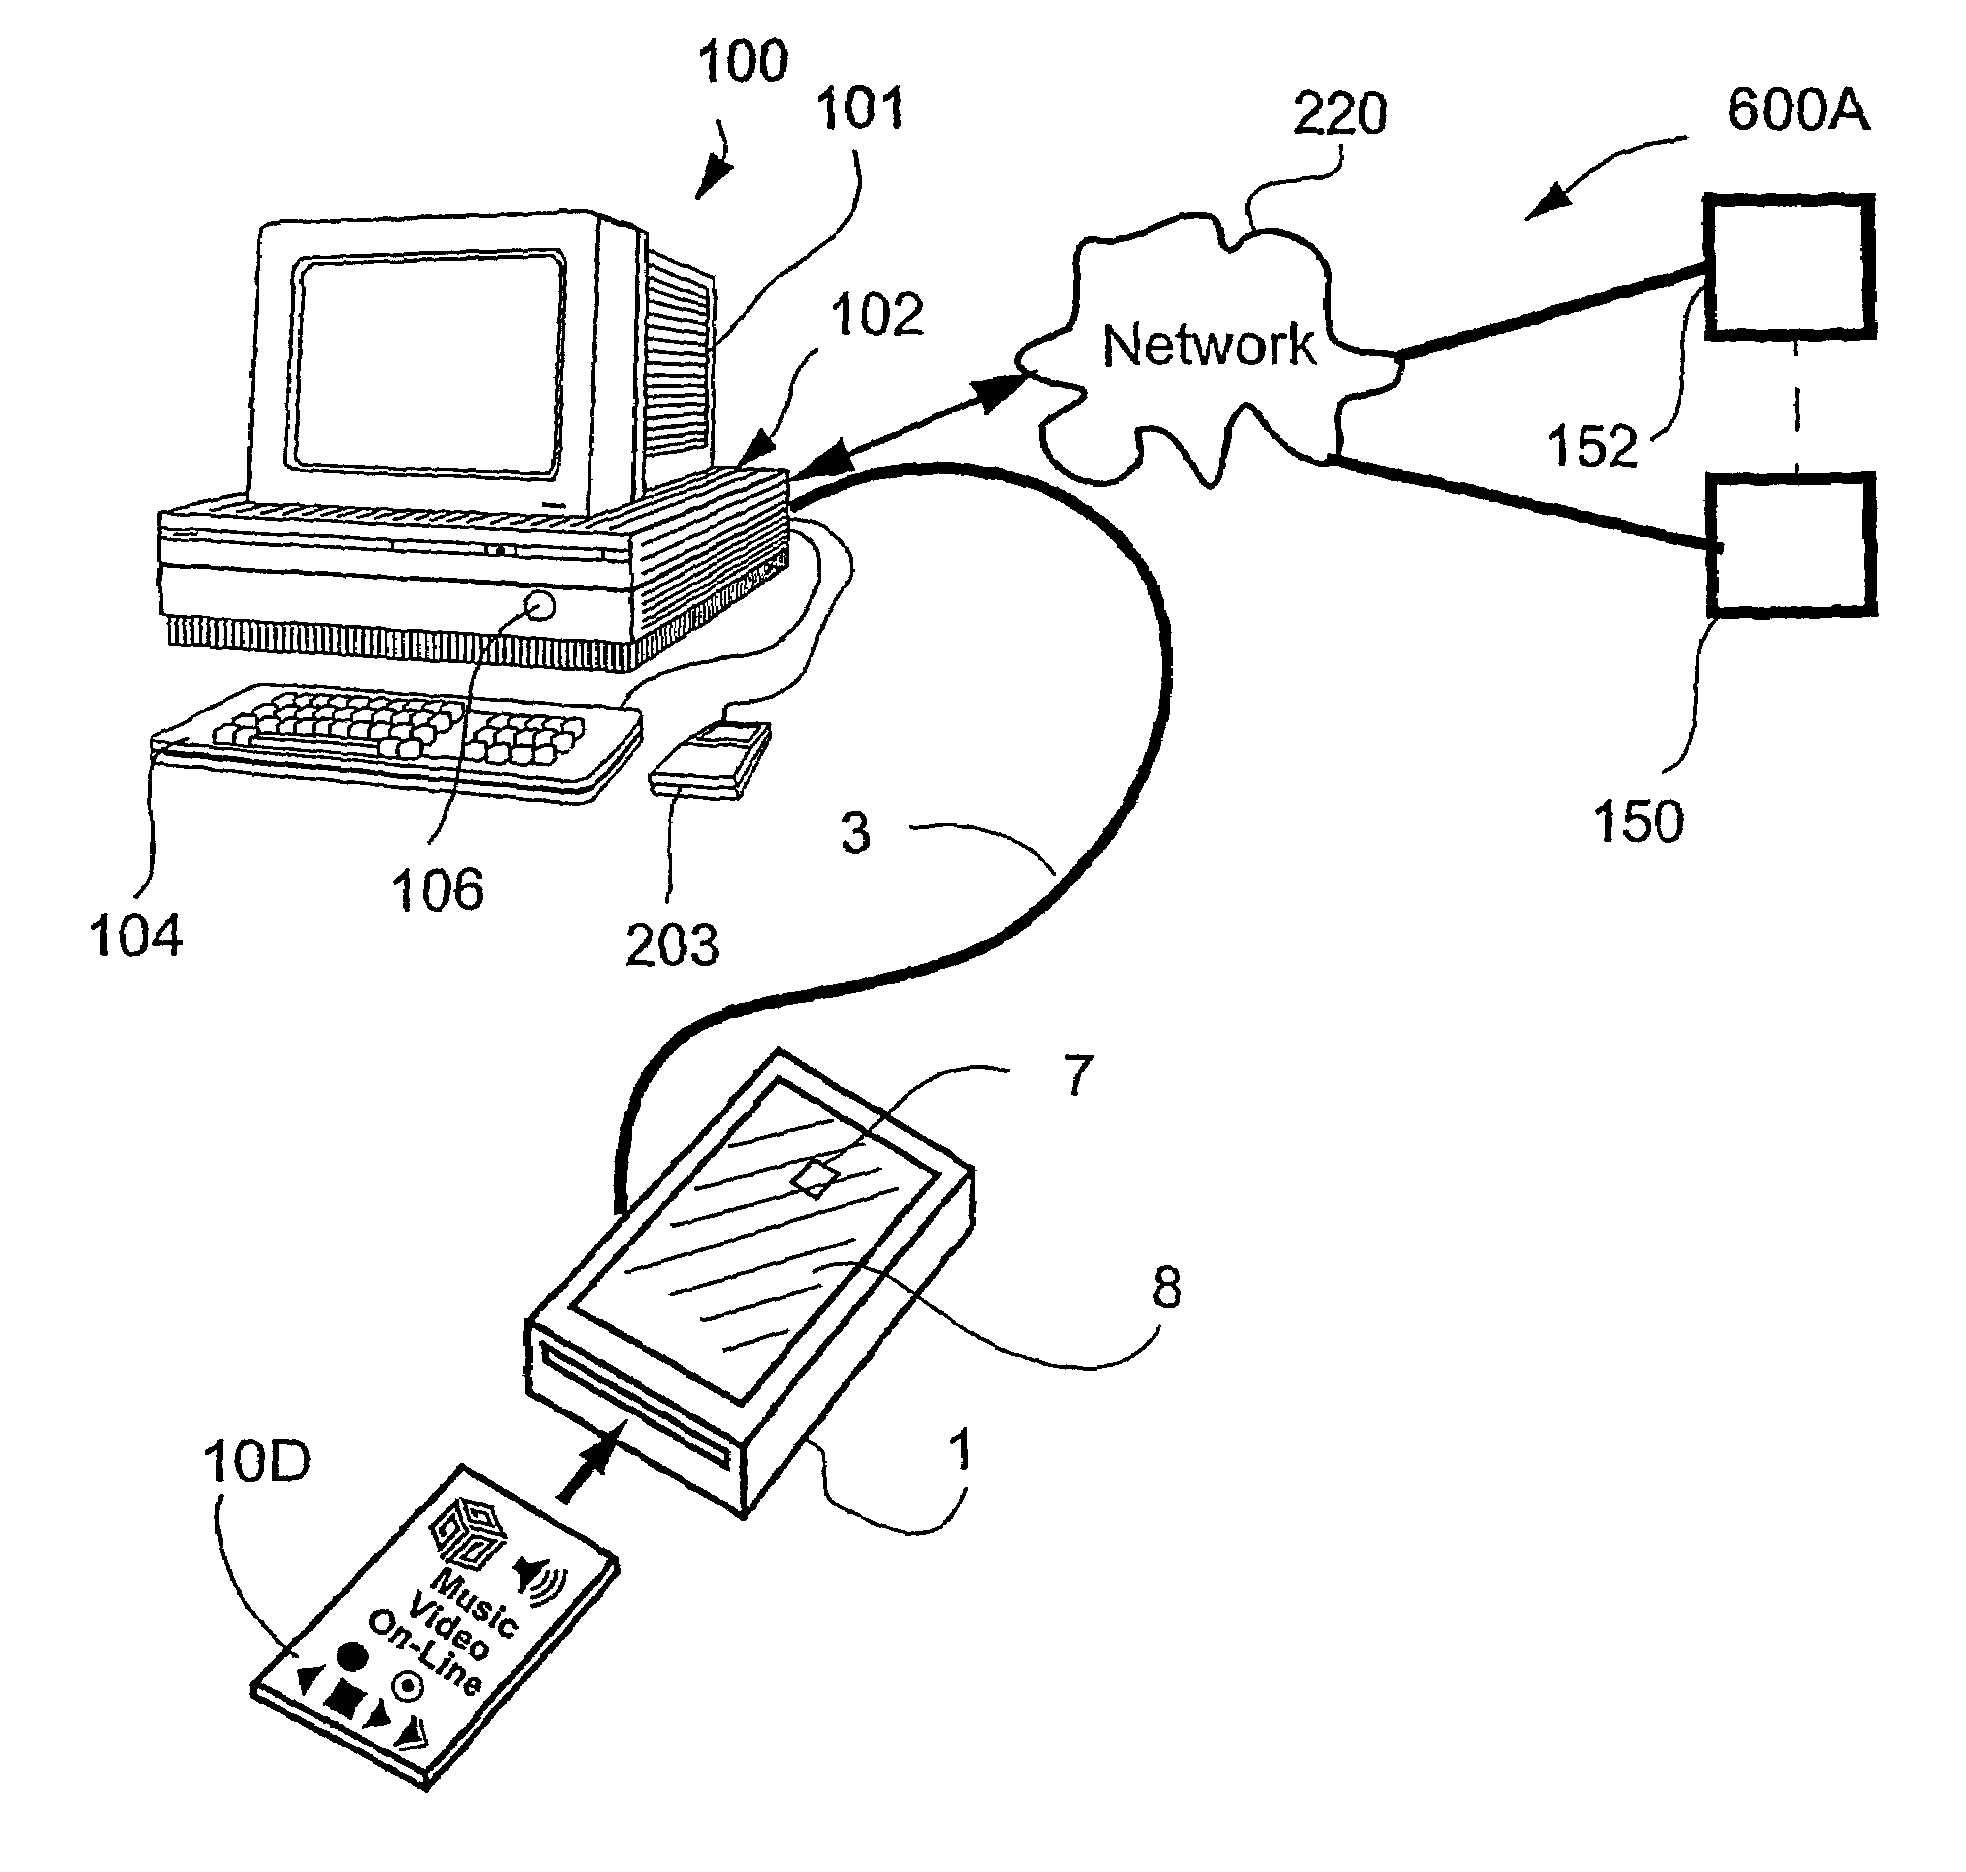 Card reading device for service access